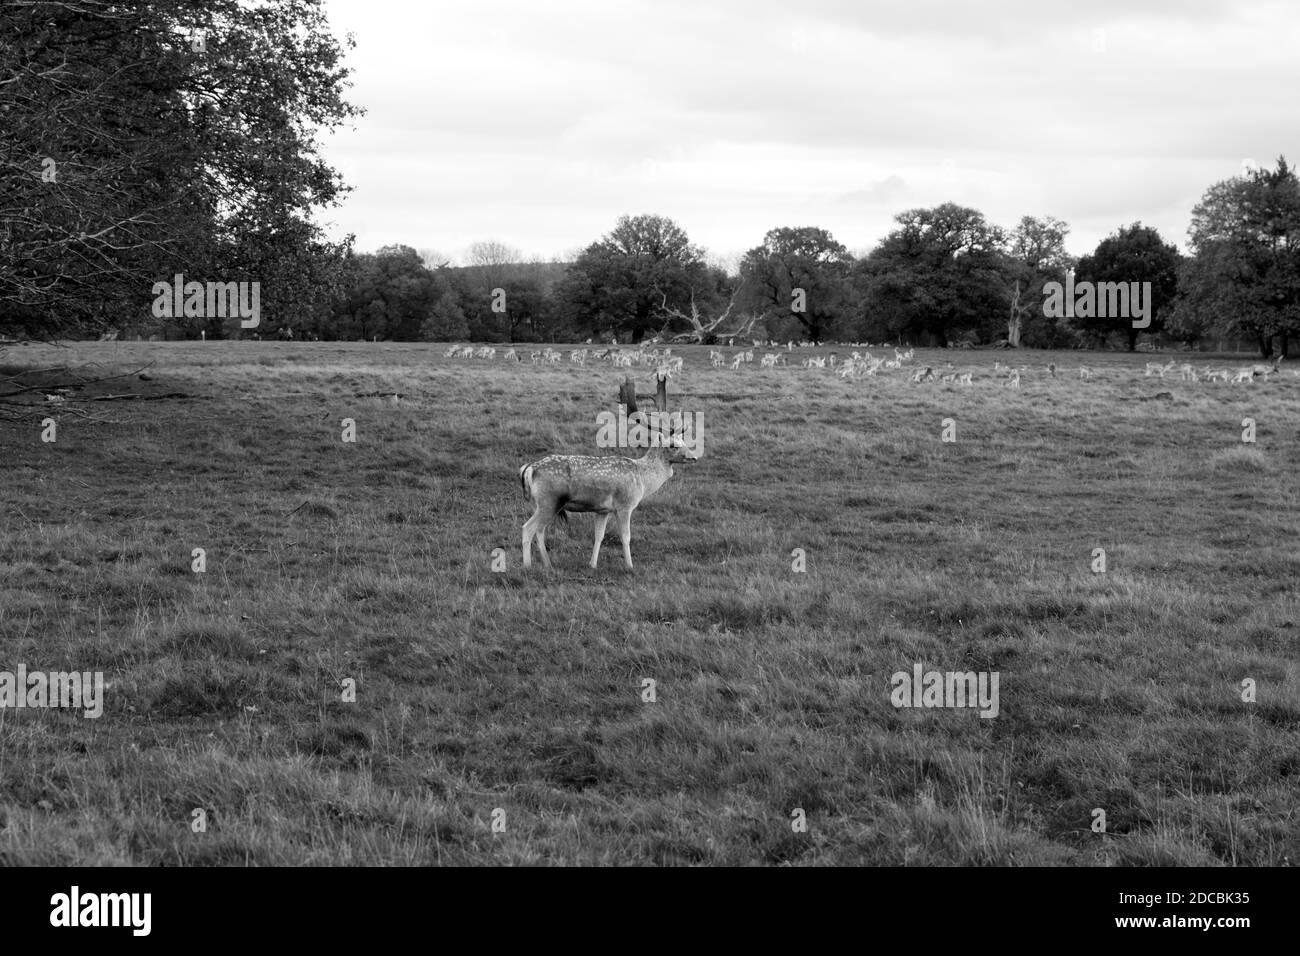 Close up black and whit image of reindeer in deer park in wintertime.  A stag deer with fabulous antlers s on grassland Stock Photo